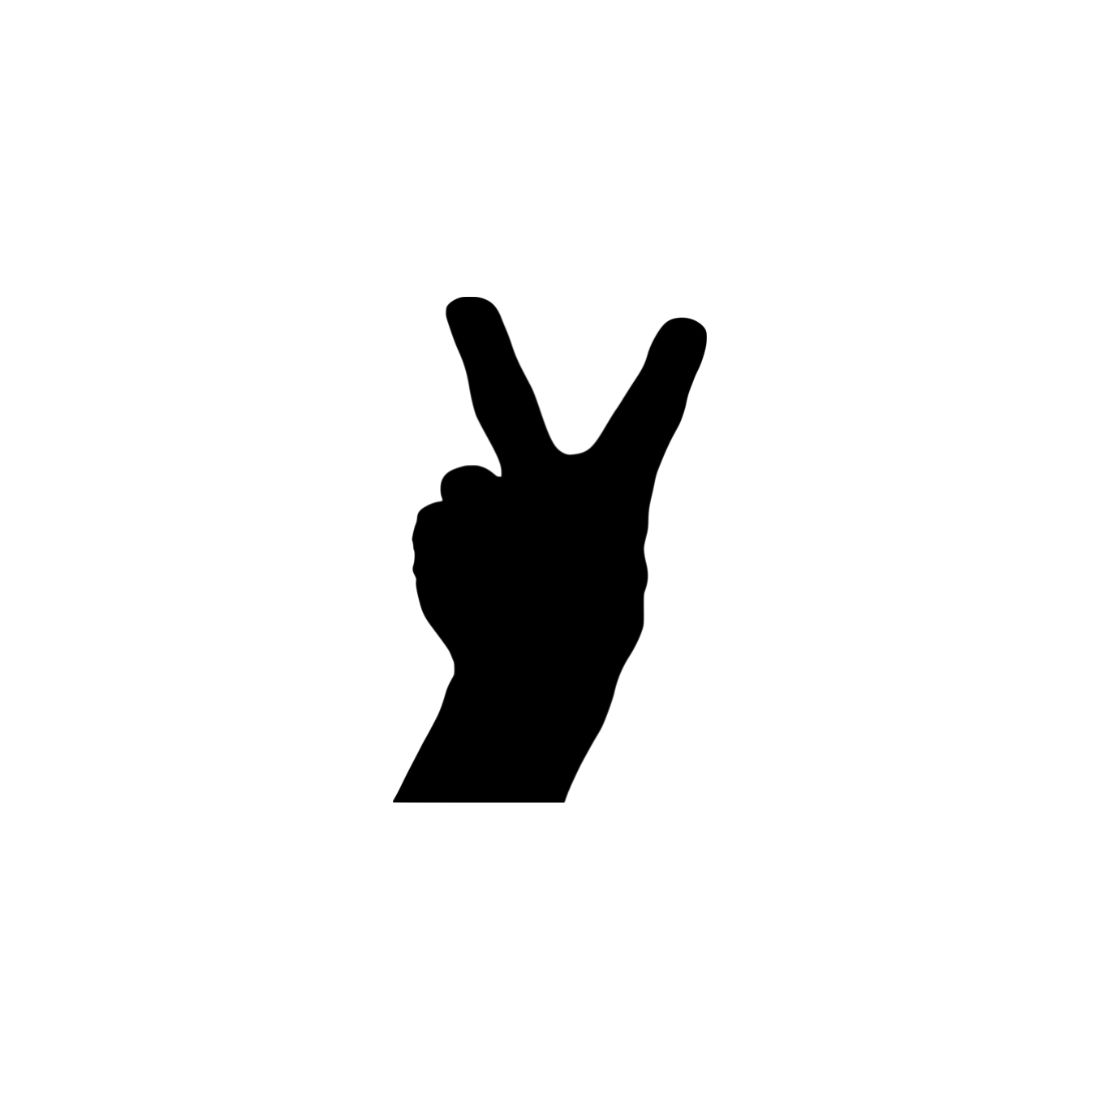 Hand Gesture Silhouette collection.